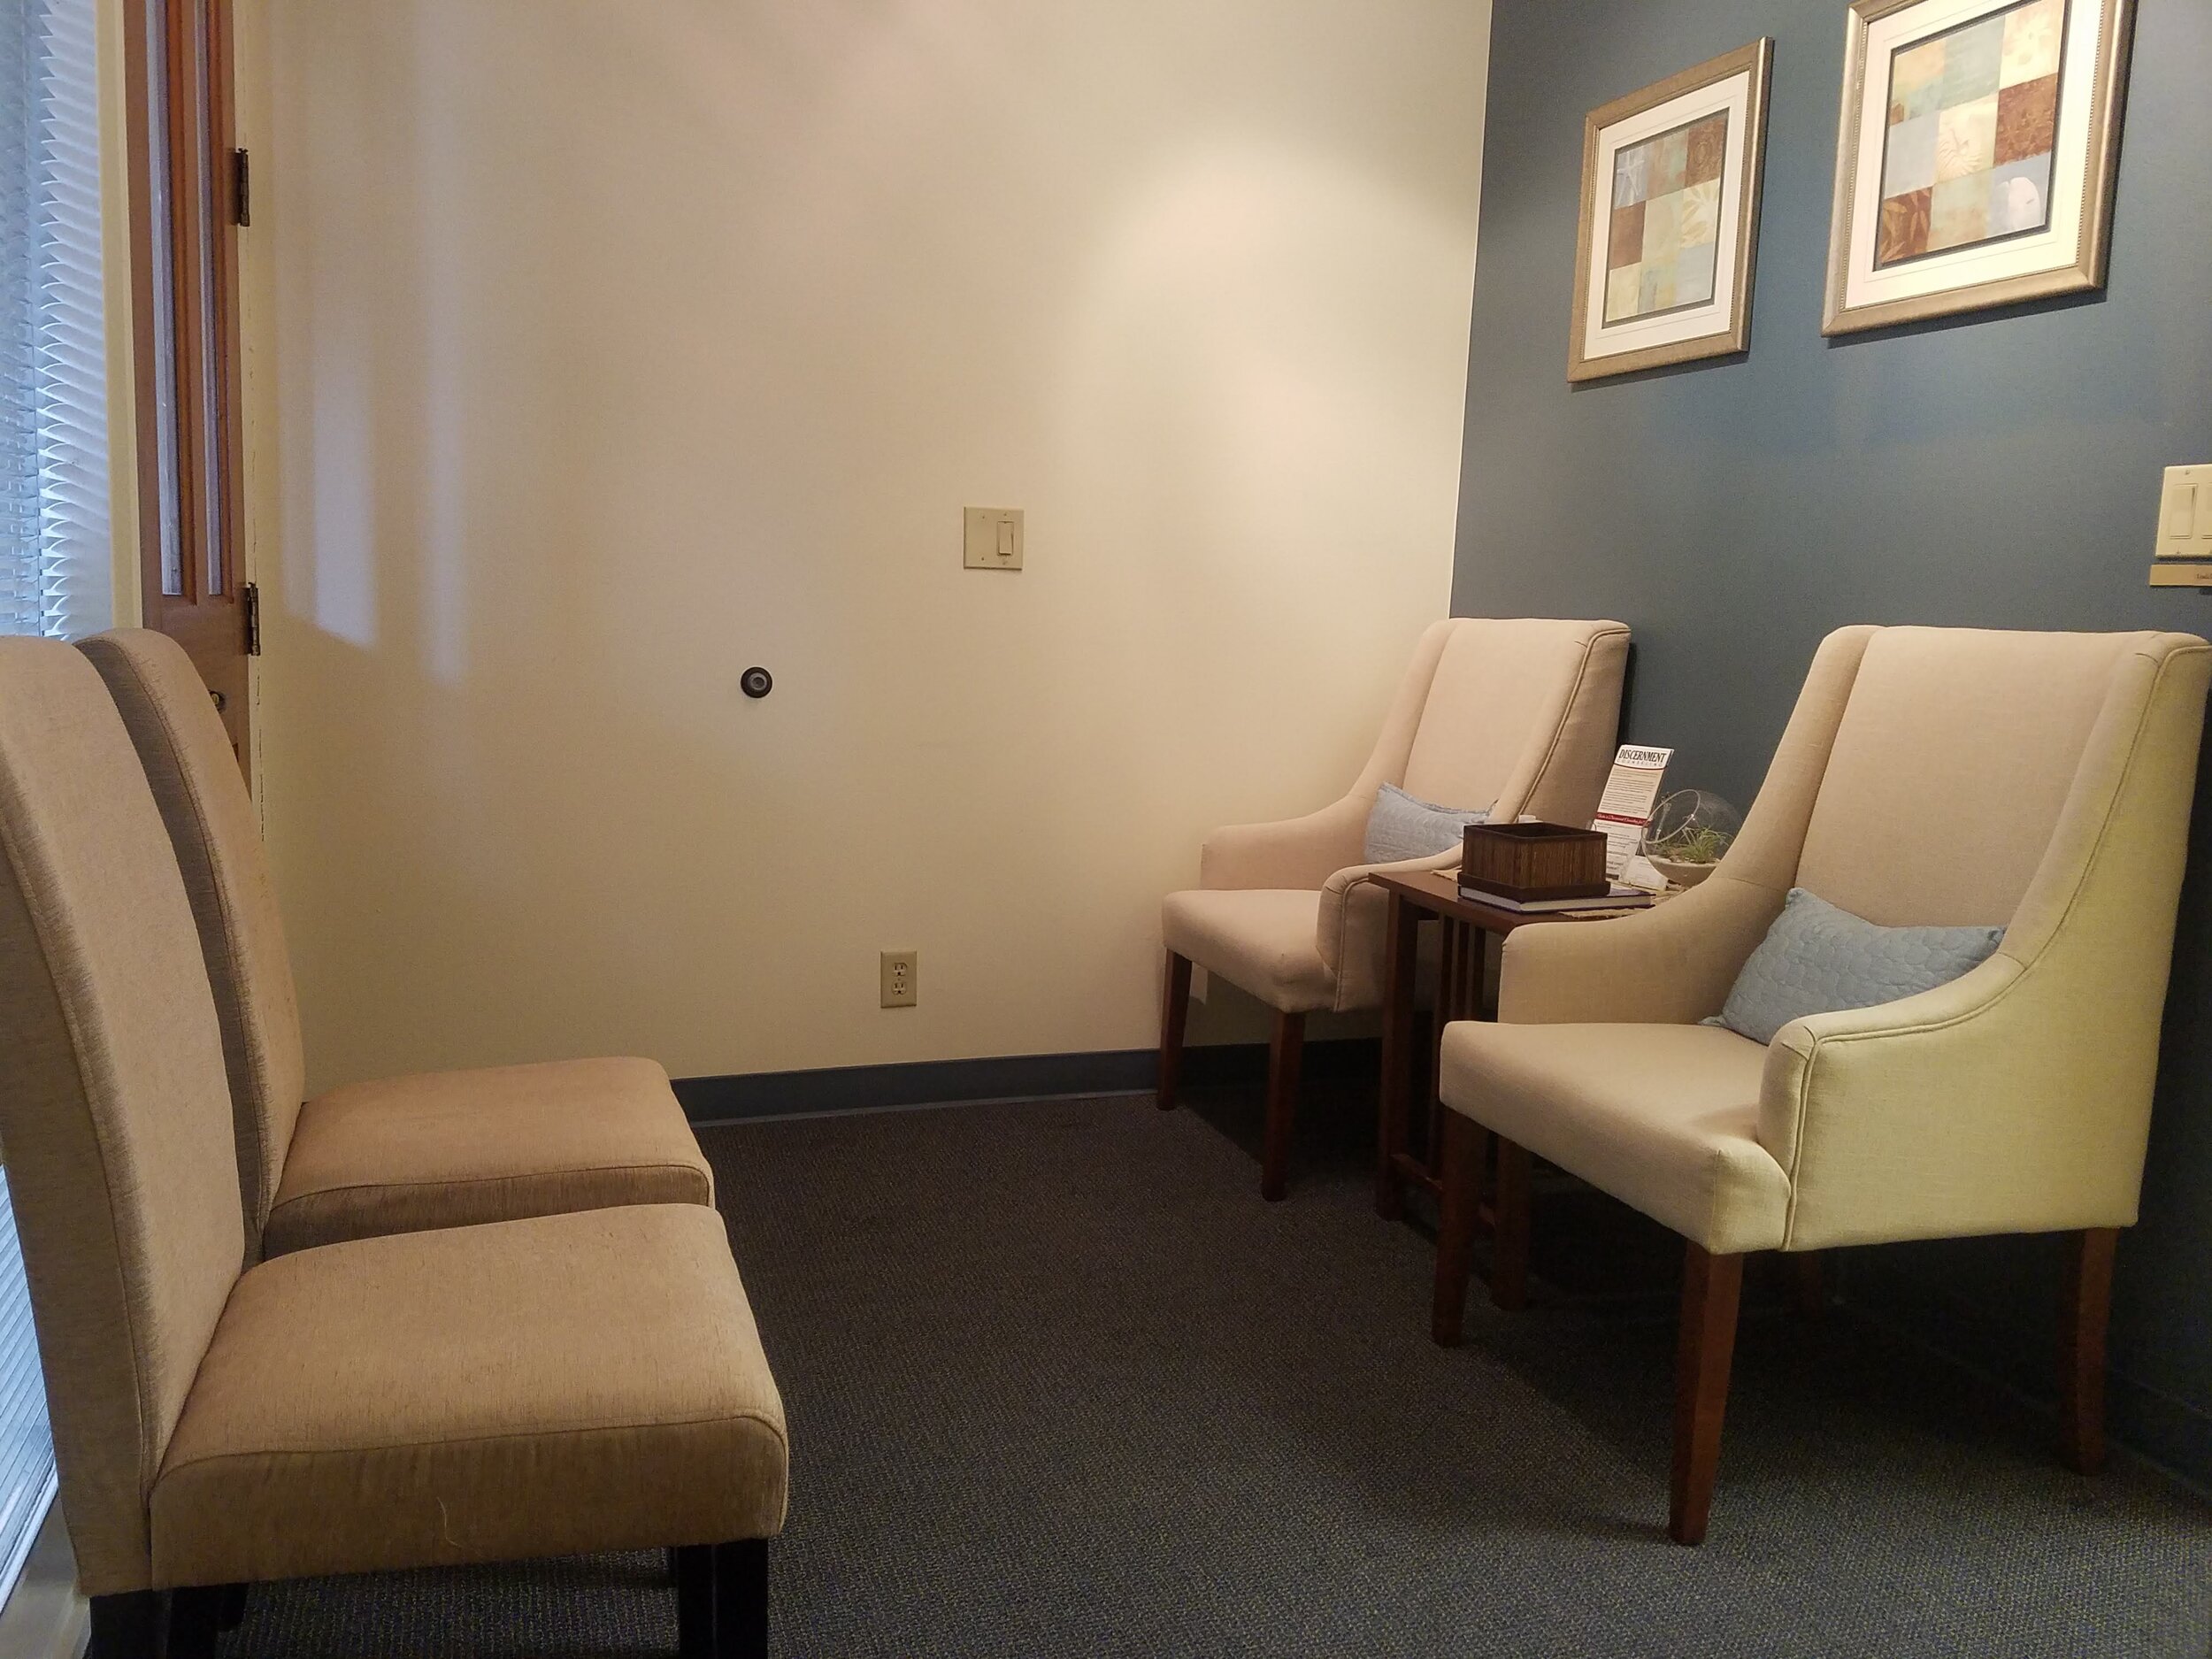 Counseling Waiting Room.jpg